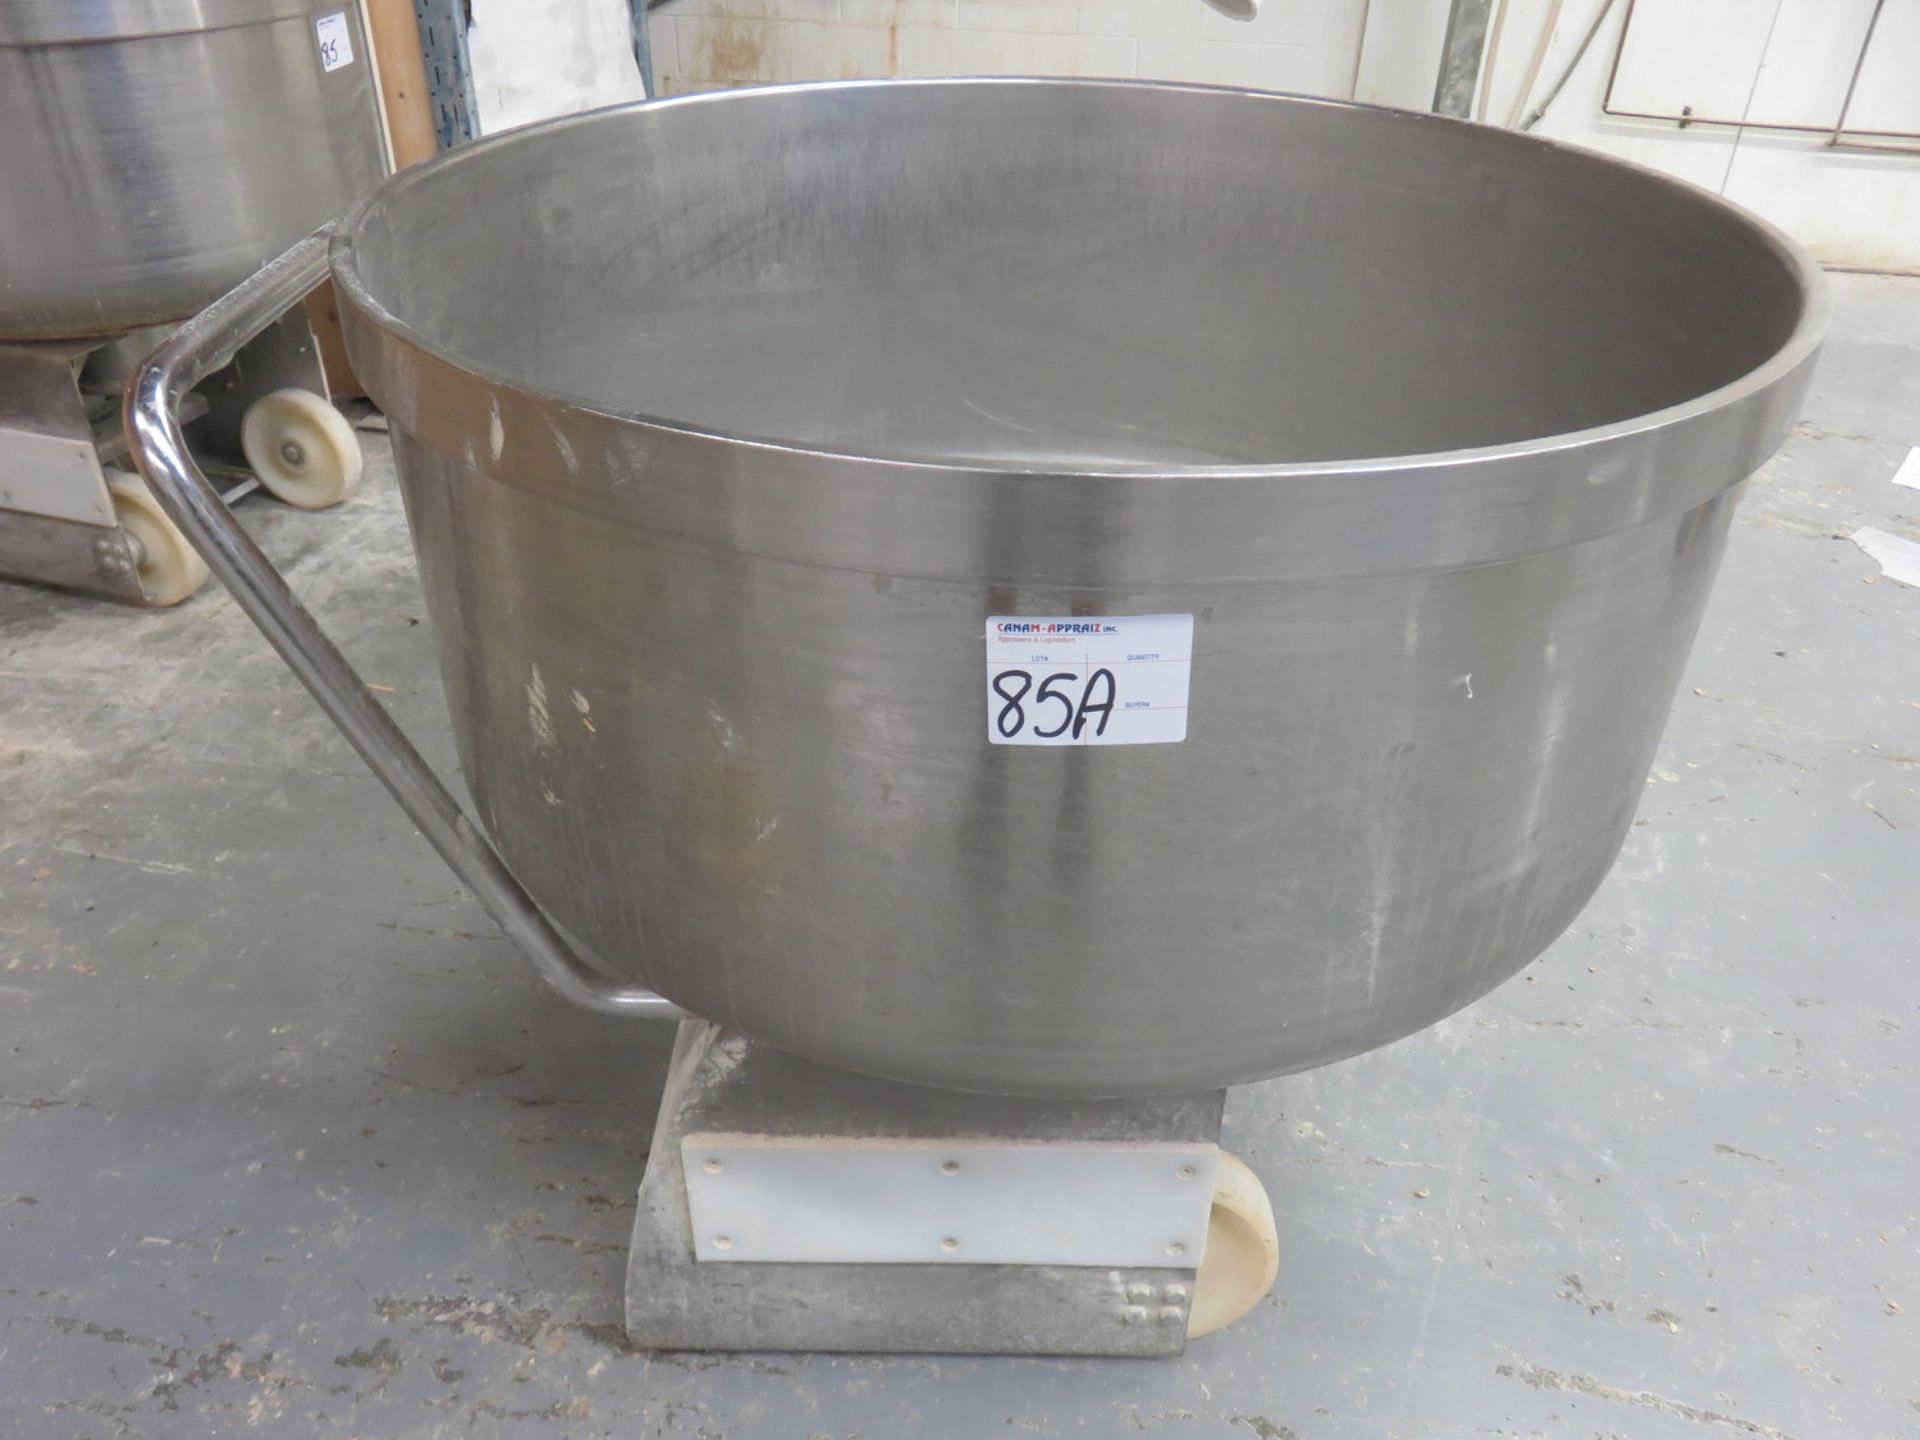 STAINLESS STEEL APPROX 40.75"DIA X 19"DEEP APPROX. 250-300KG CAP ROLLING SPIRAL DOUGH MIXING BOWL